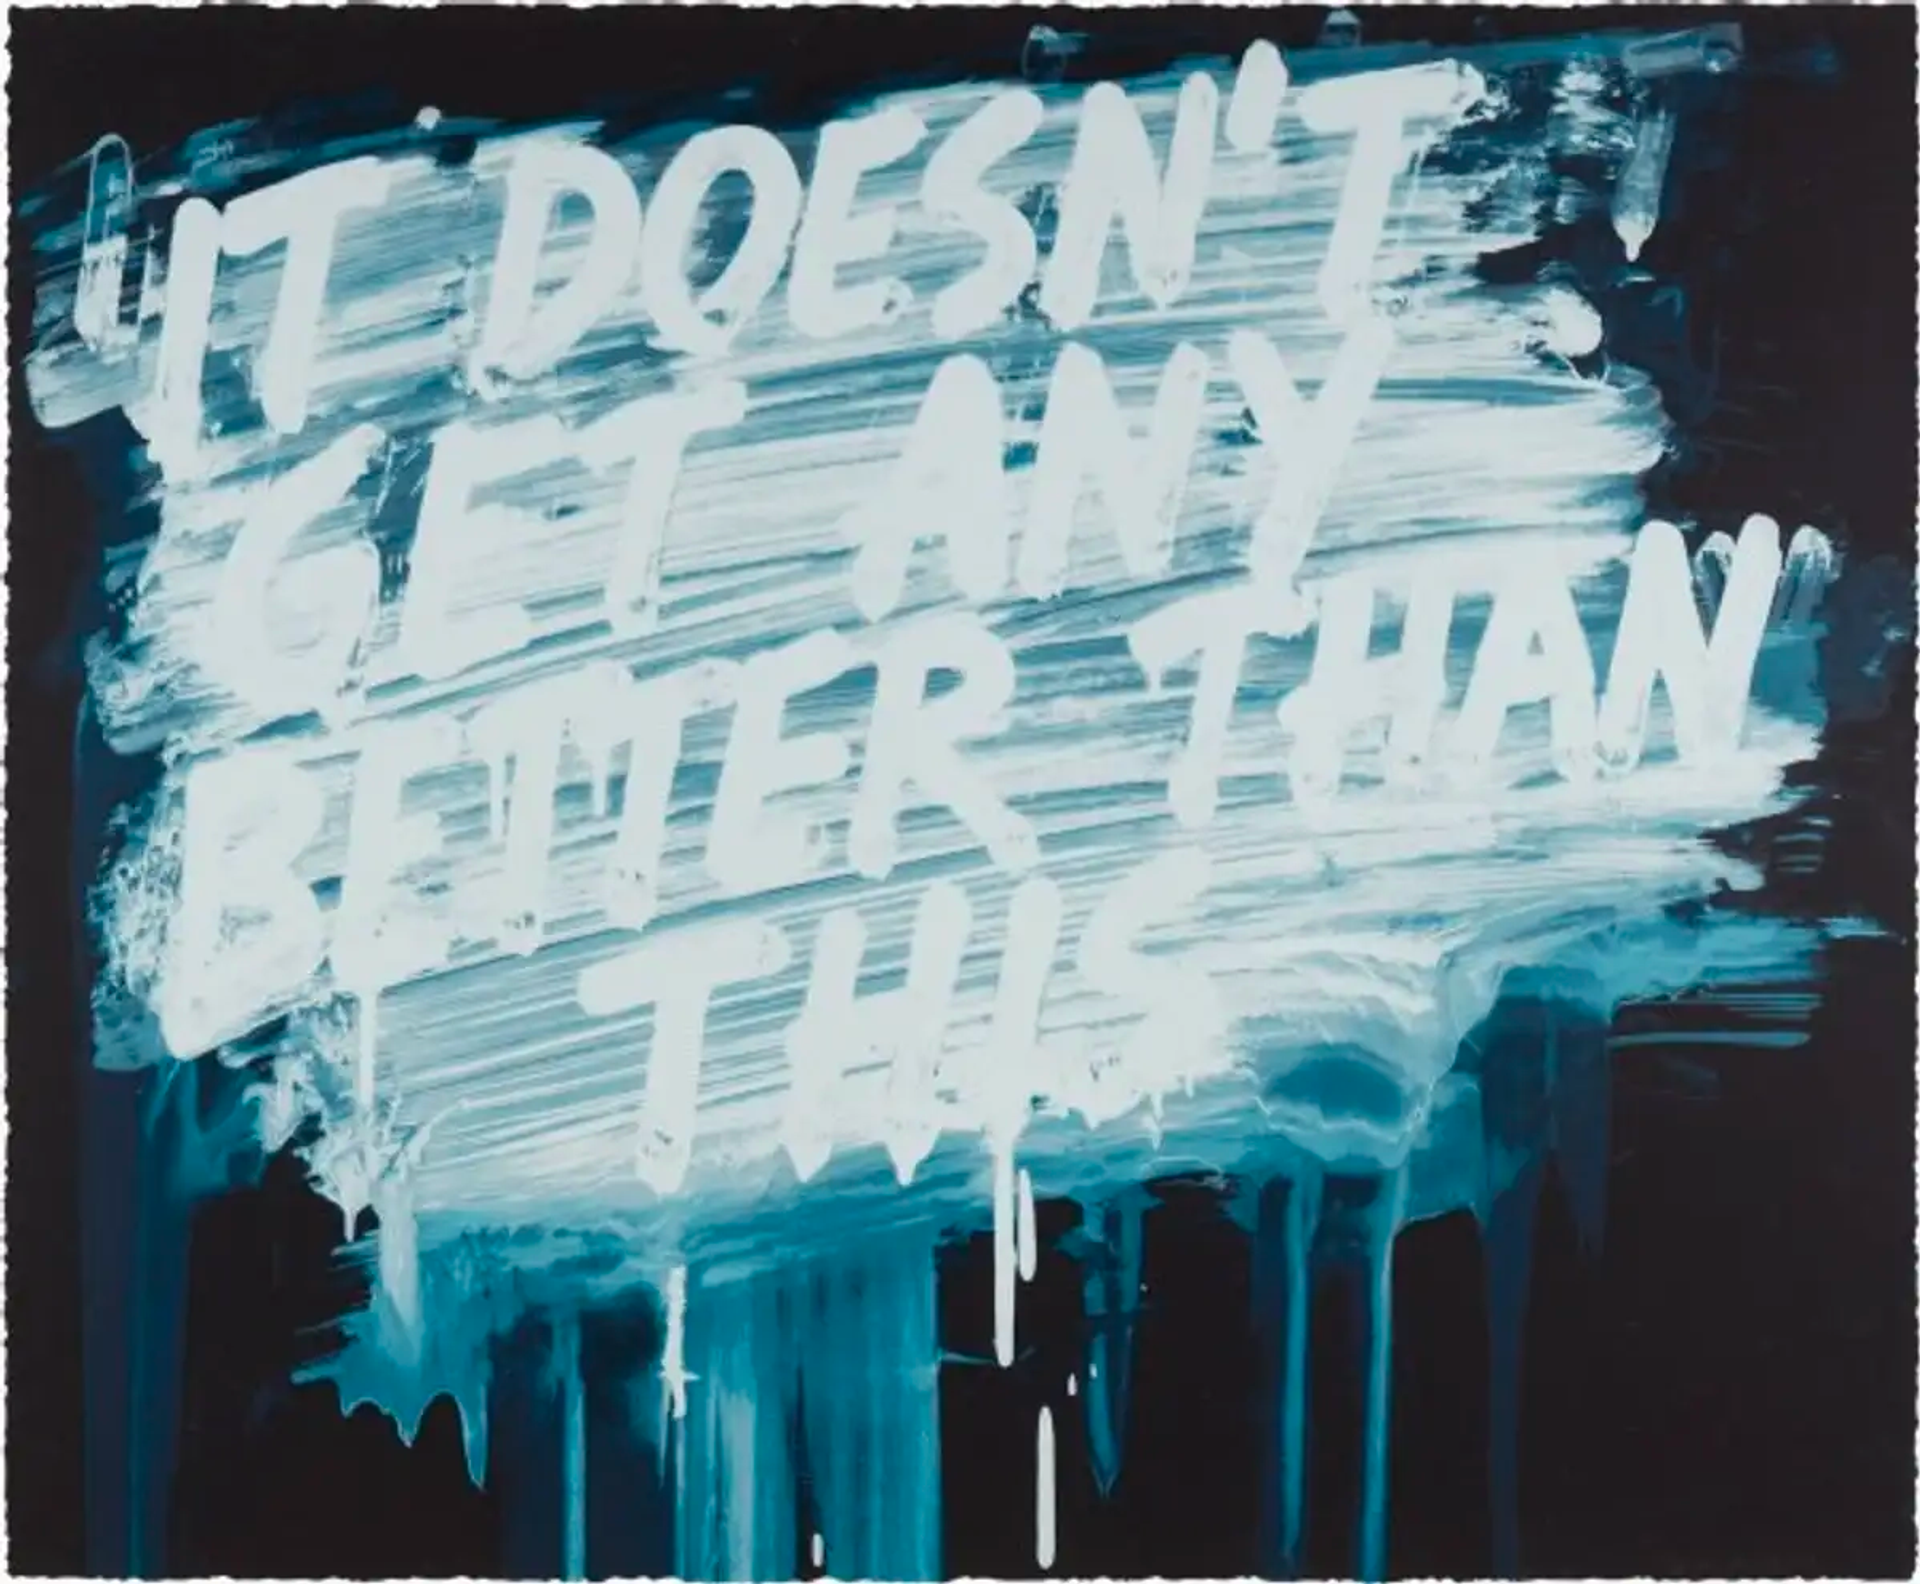 An abstract blue background with smeared white paint horizontally across it. The words “It doesn't get any better than this’’ are written in capital letters, slanting upwards. The dripping white paint creates a light blue hue against the dark background.